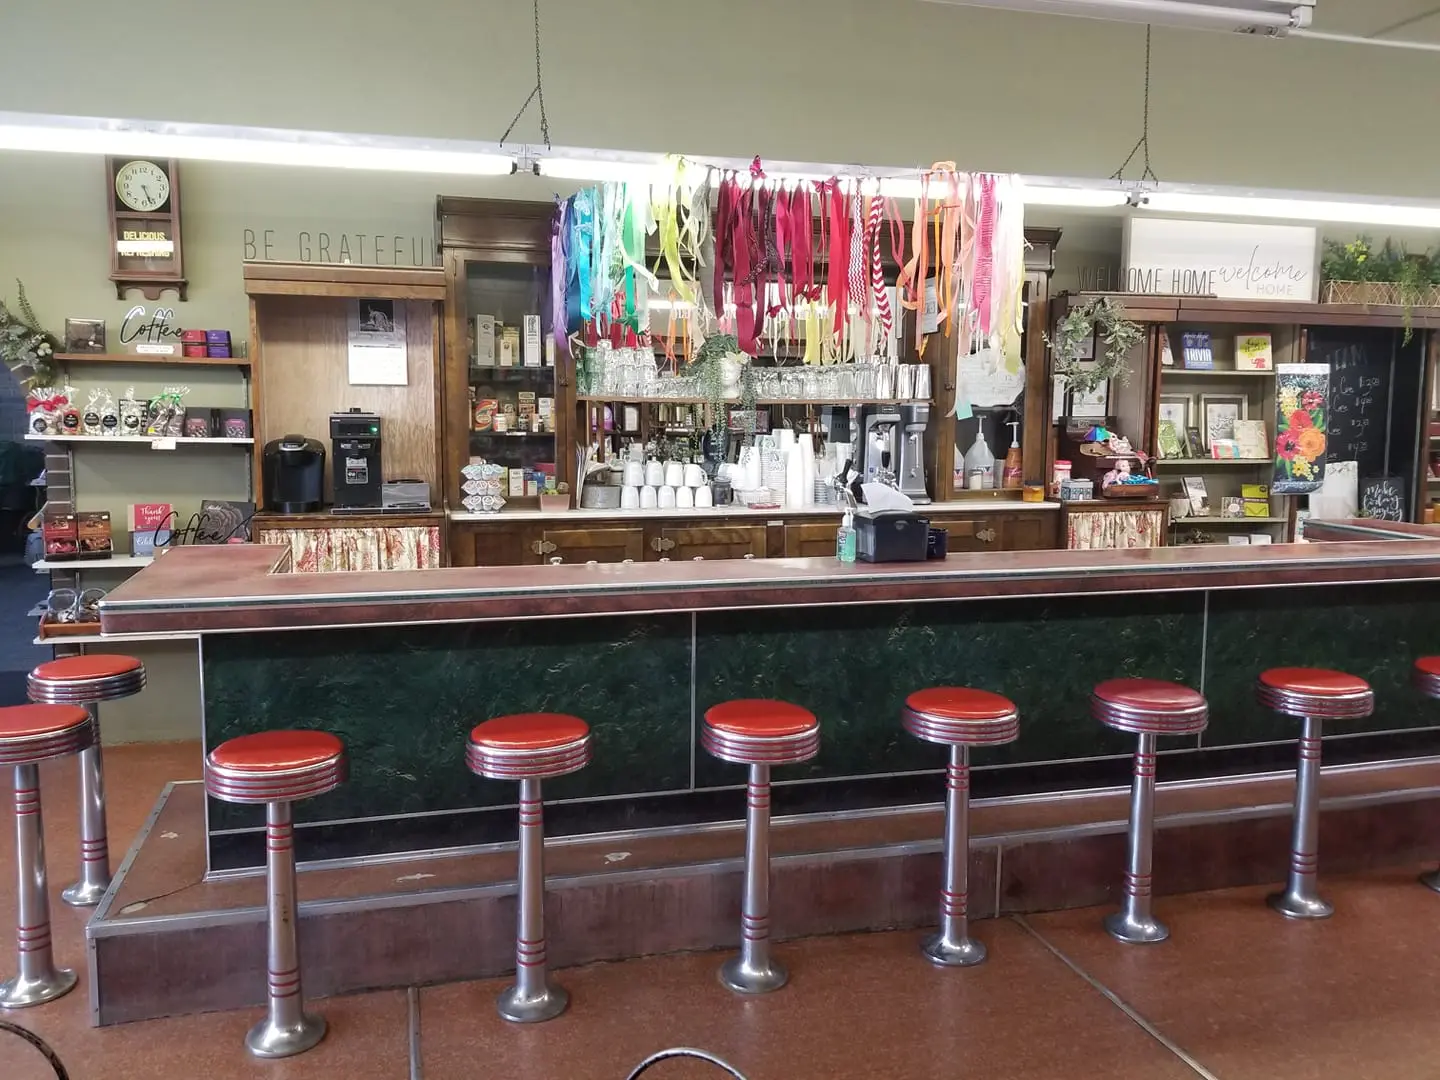 Standing behind an old soda fountain with a red counter, red stools and a colorful array of ribbons hanging from the ceiling.